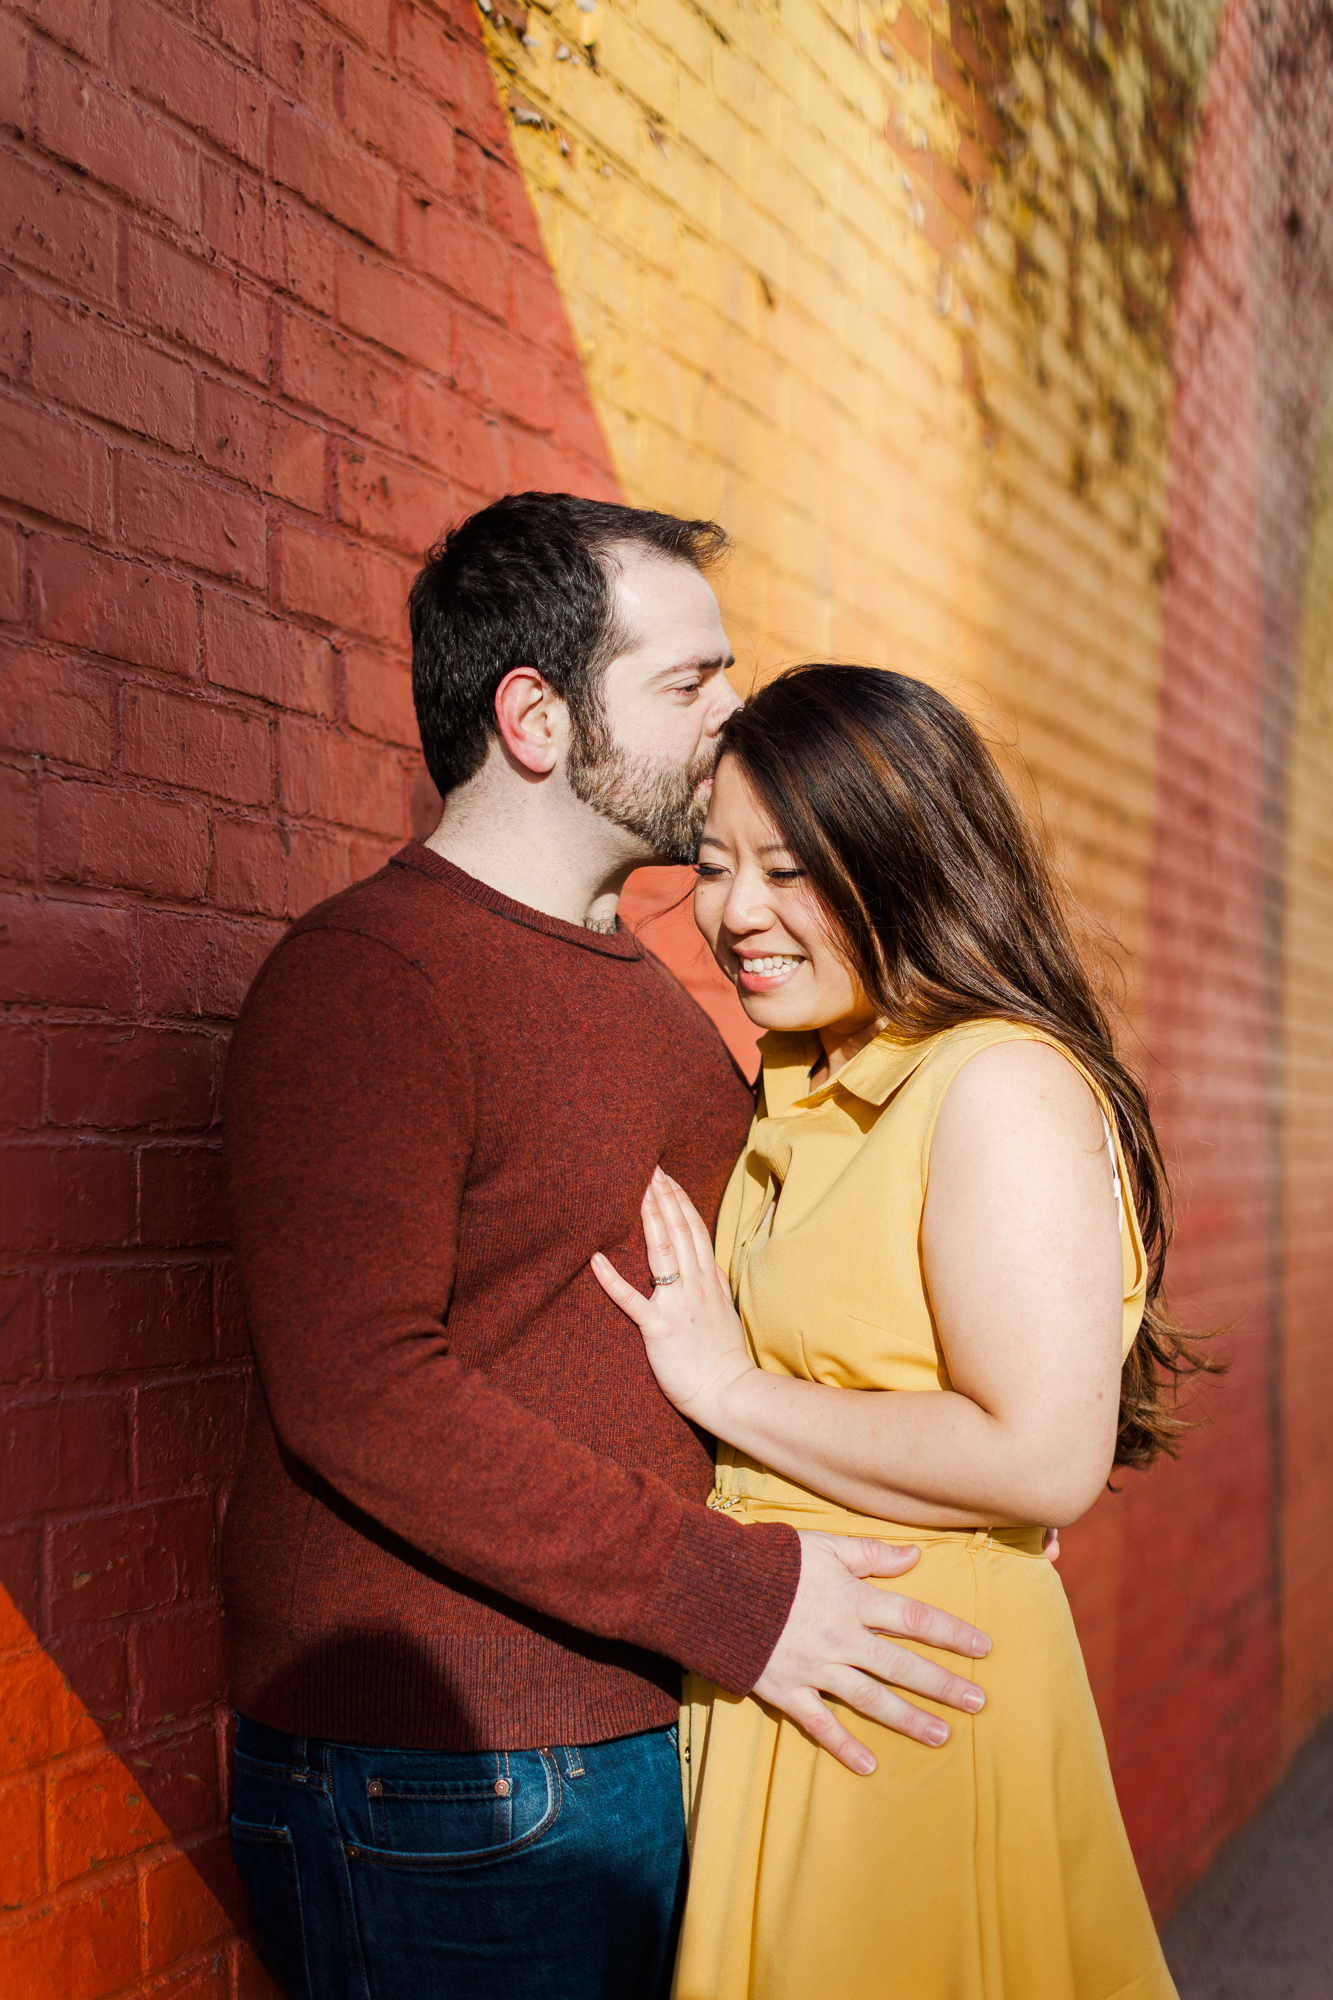 Radiant Brooklyn Bridge Engagement Photography with Matching Outfits